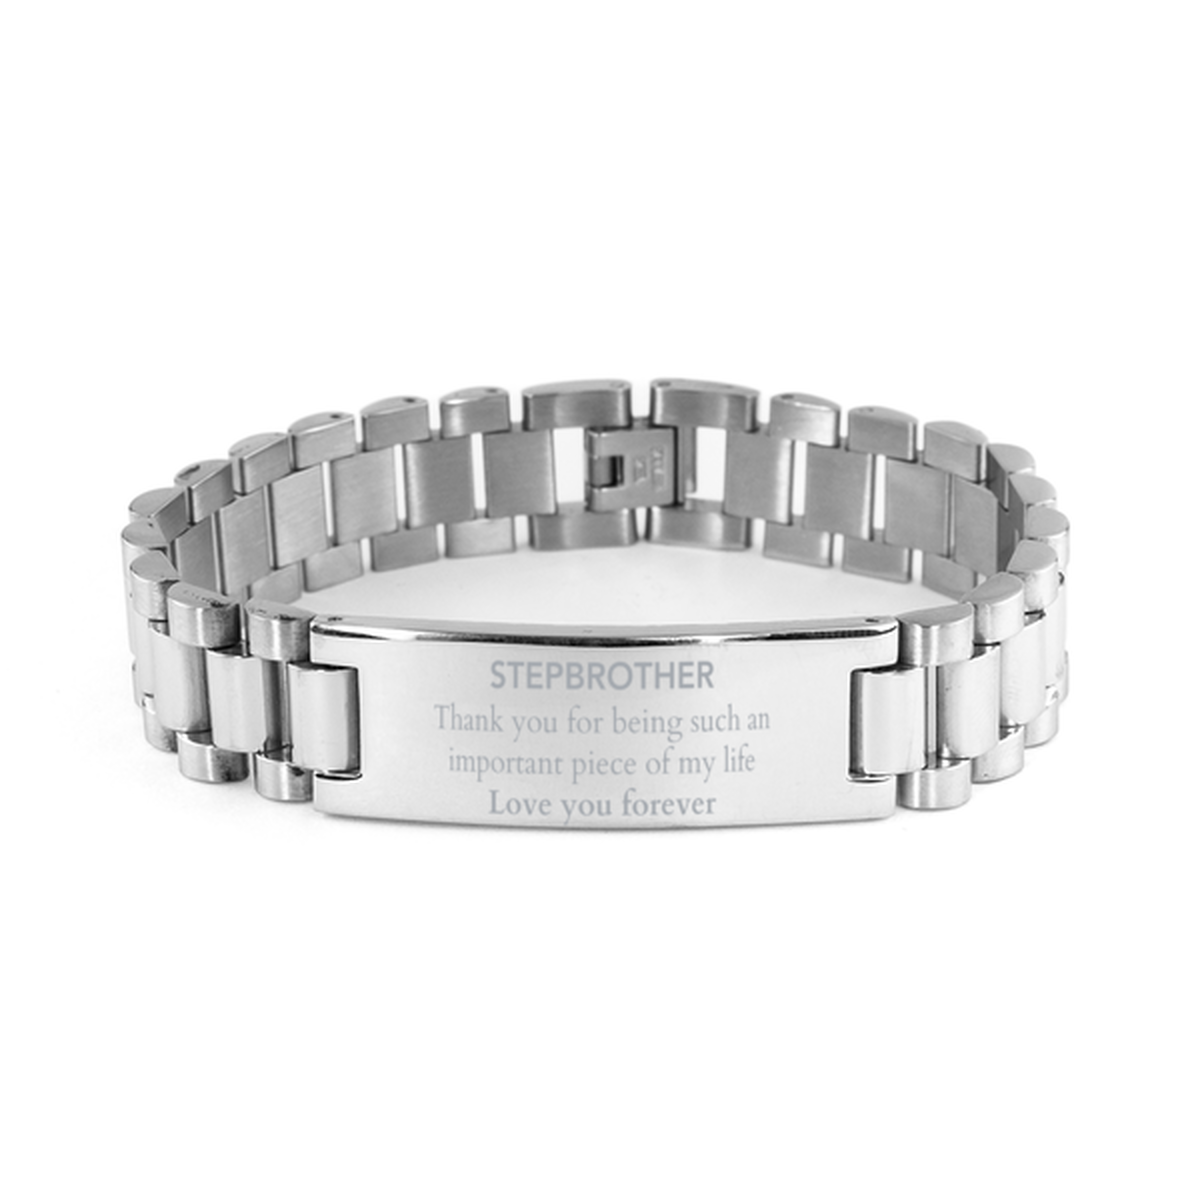 Appropriate Stepbrother Ladder Stainless Steel Bracelet Epic Birthday Gifts for Stepbrother Thank you for being such an important piece of my life Stepbrother Christmas Mothers Fathers Day